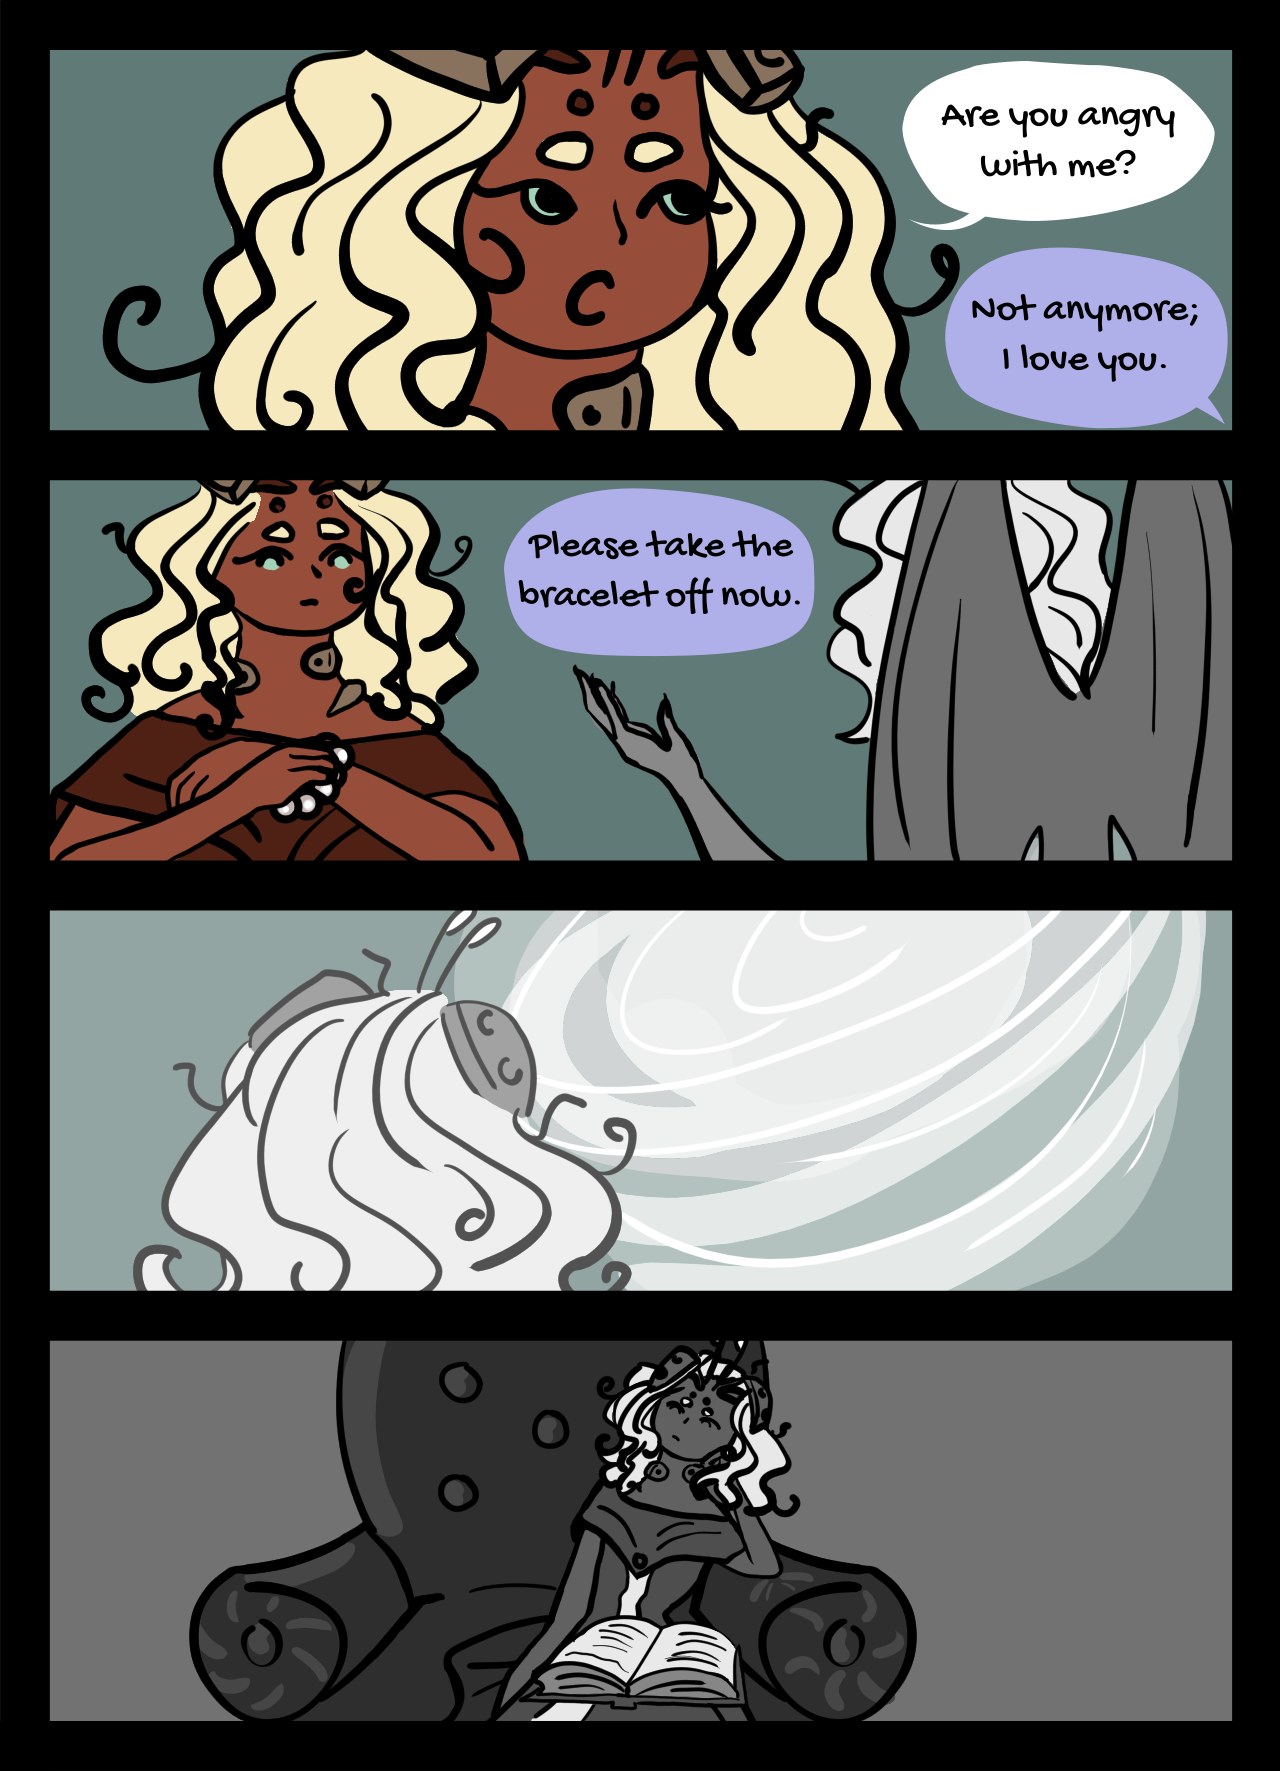 Page 29: A winged woman, named Crystal, asks an alien girl to remove her bracelet. When the girl does, the woman disappears in a swirl of light.